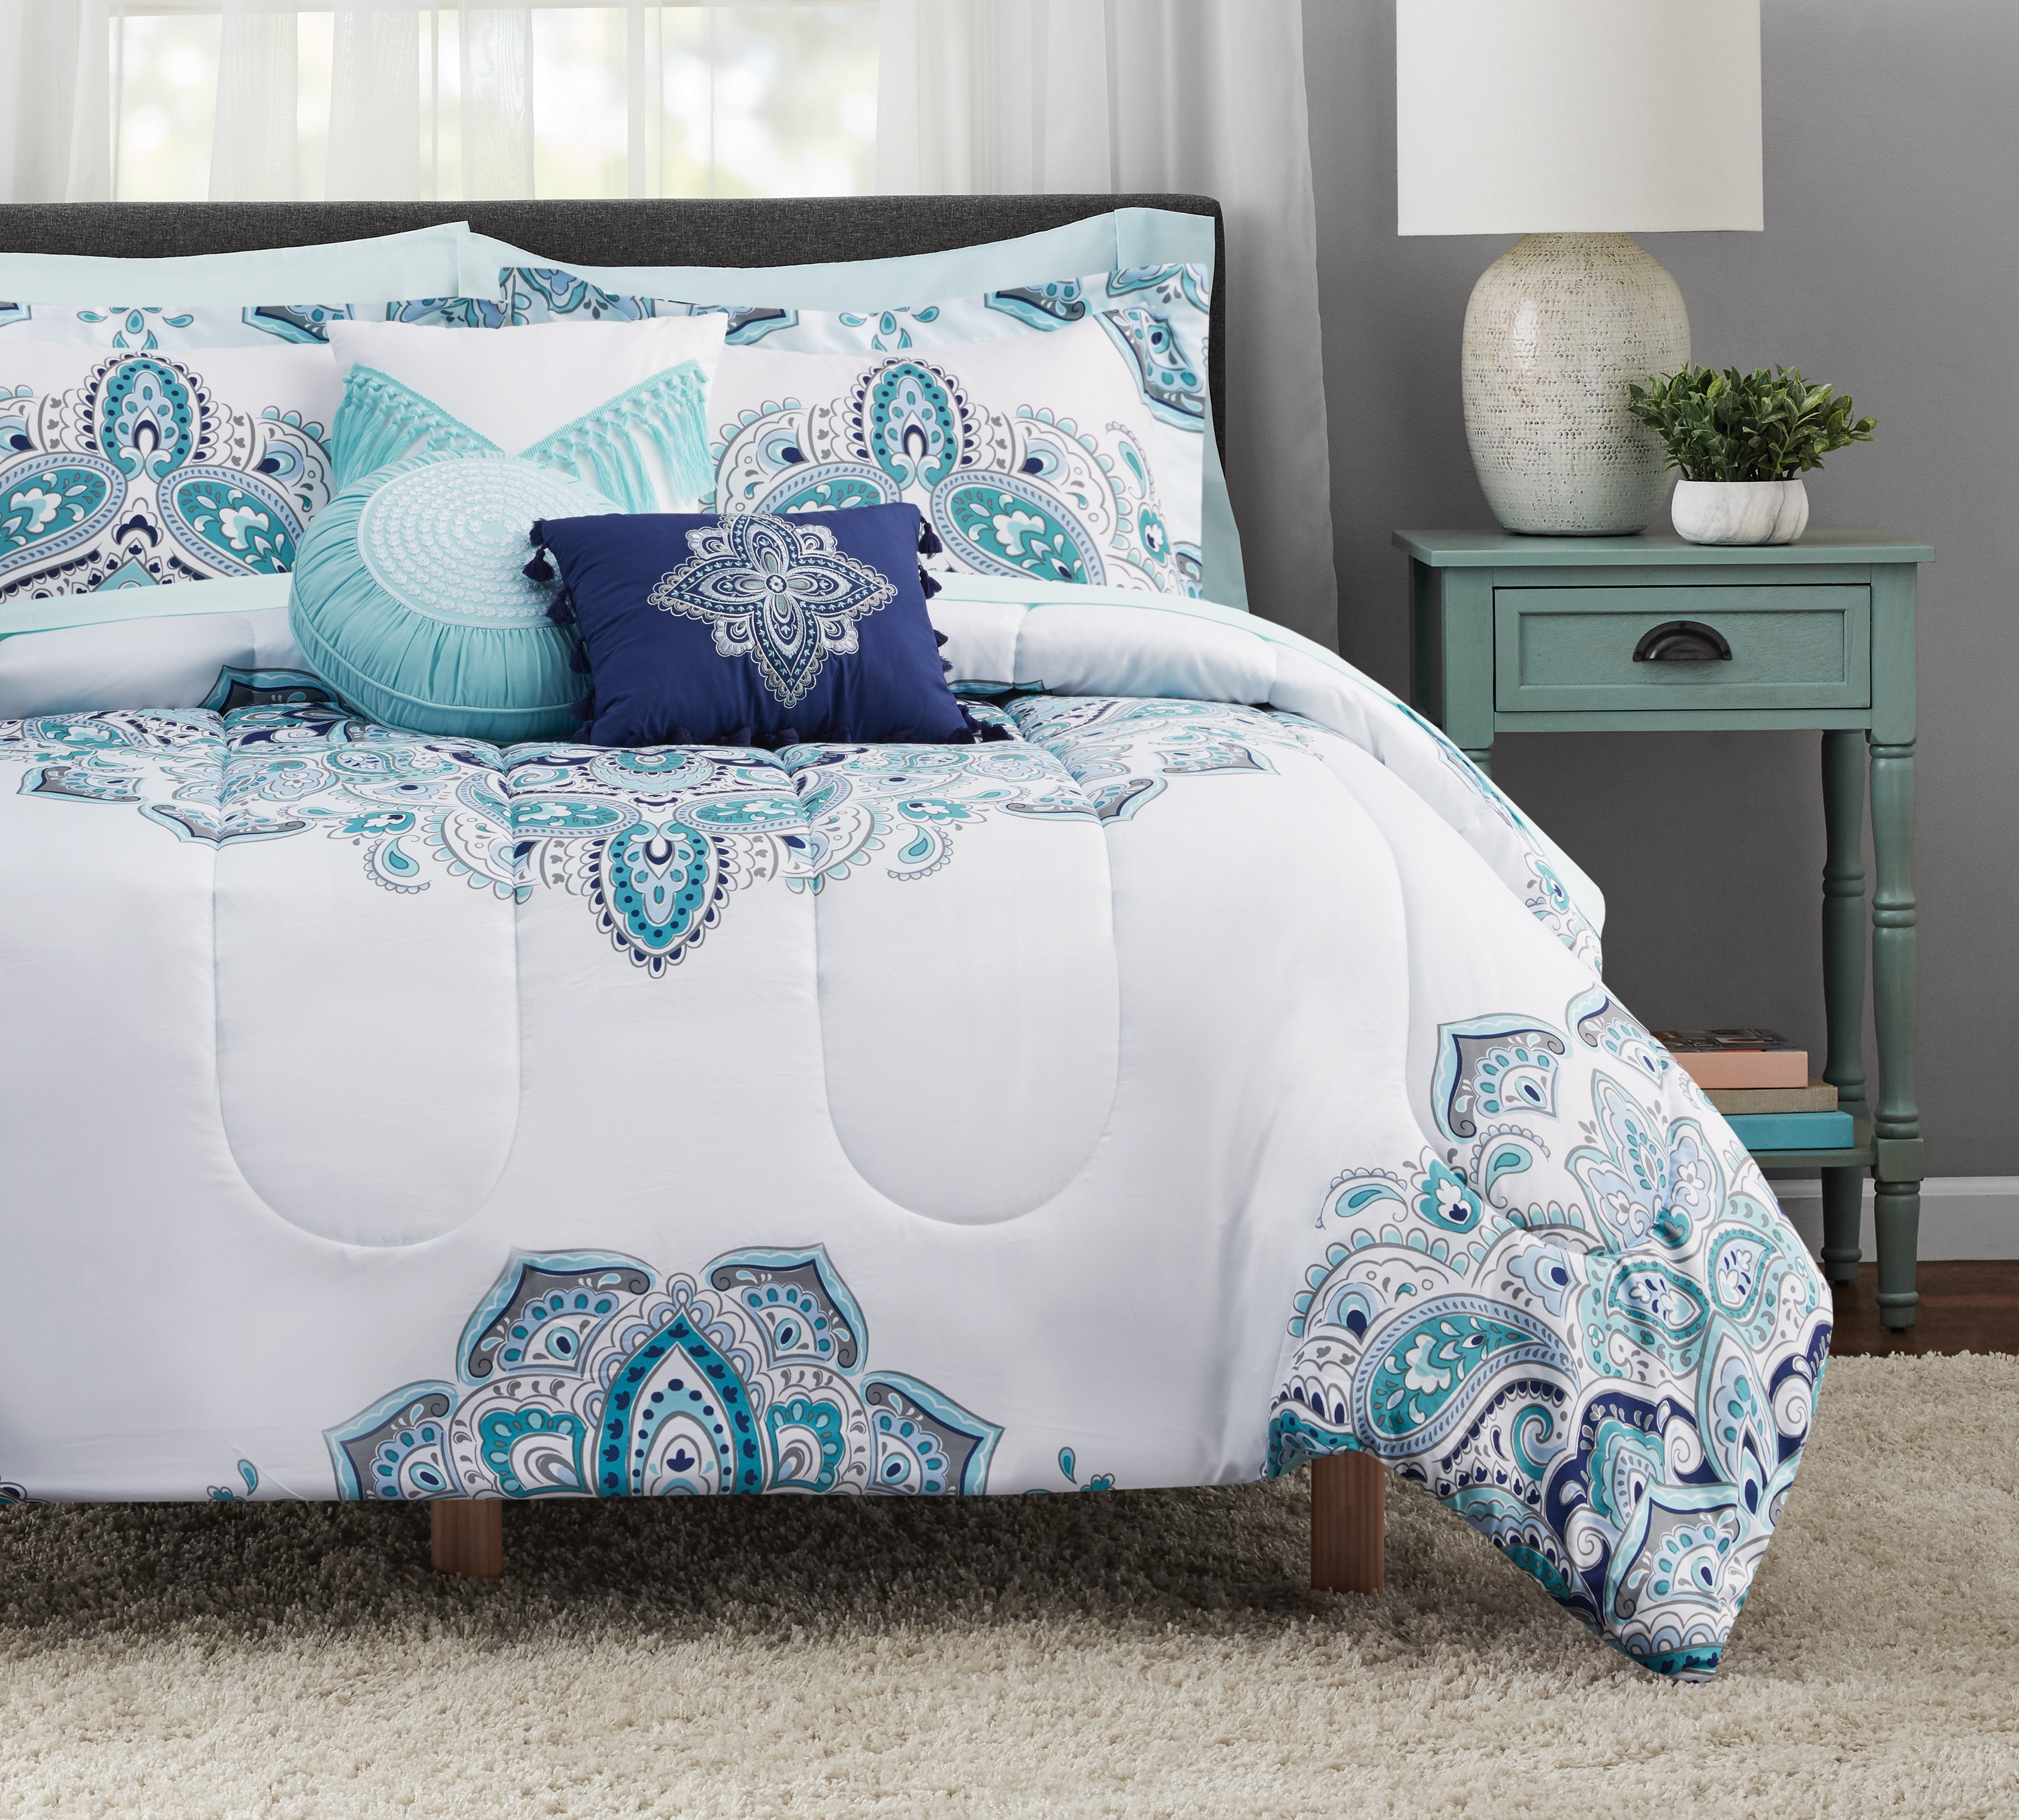 StyleWell Lane Medallion Full/Queen Bed in a Bag Comforter Set